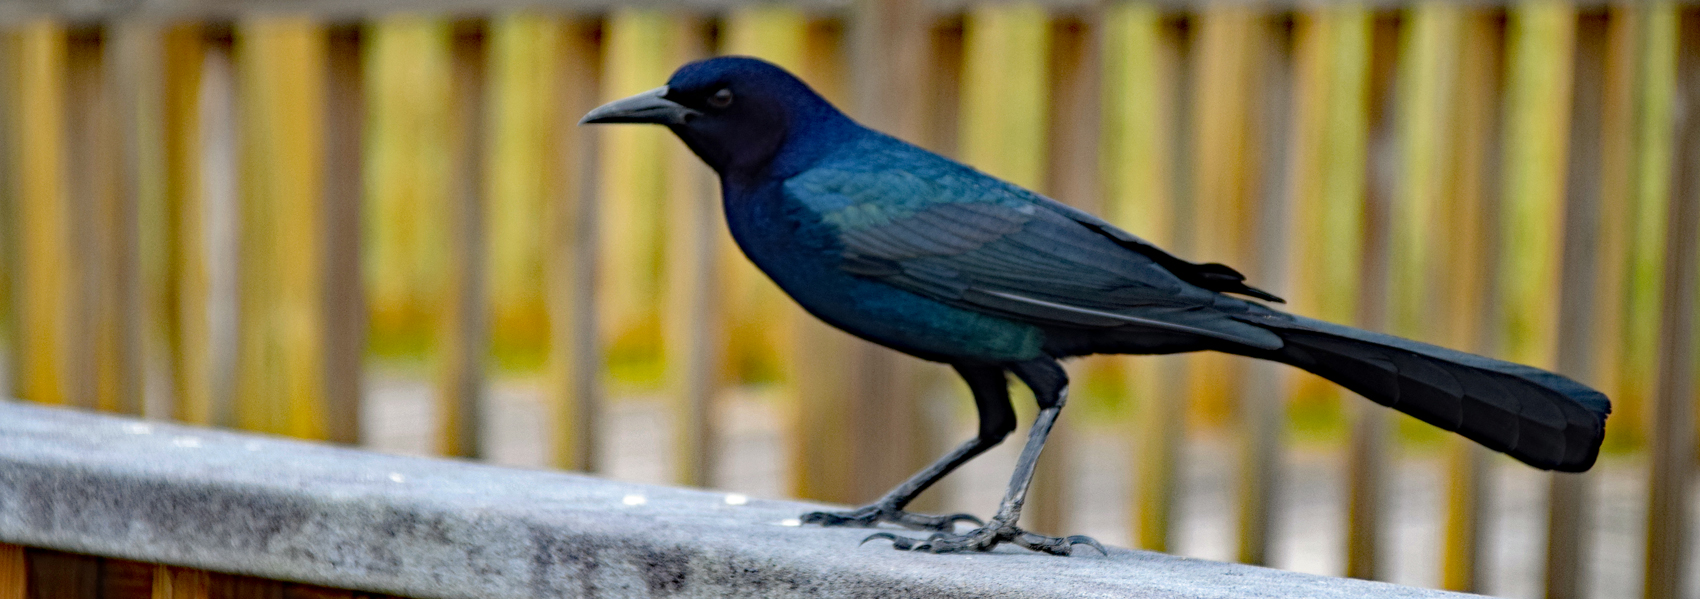 Young grackle sits on a rail